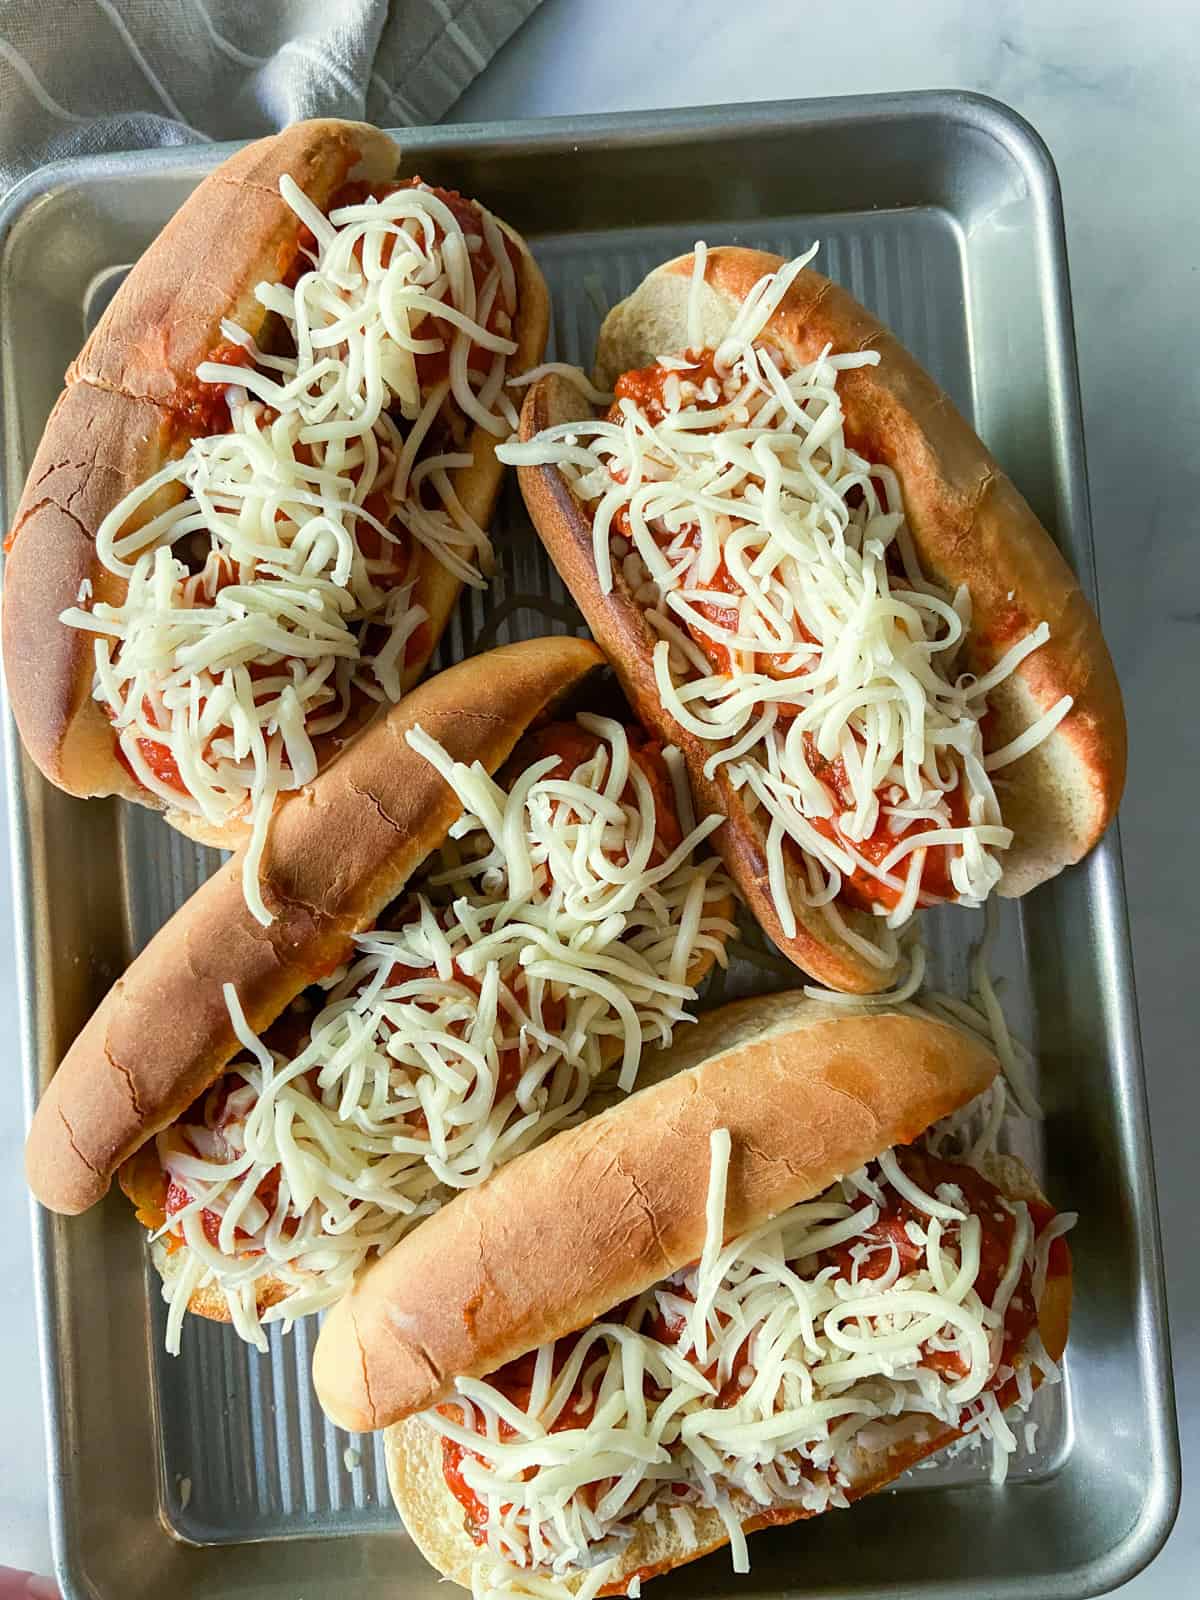 Un-broiled meatball subs covered in shredded cheese on a sheet tray.